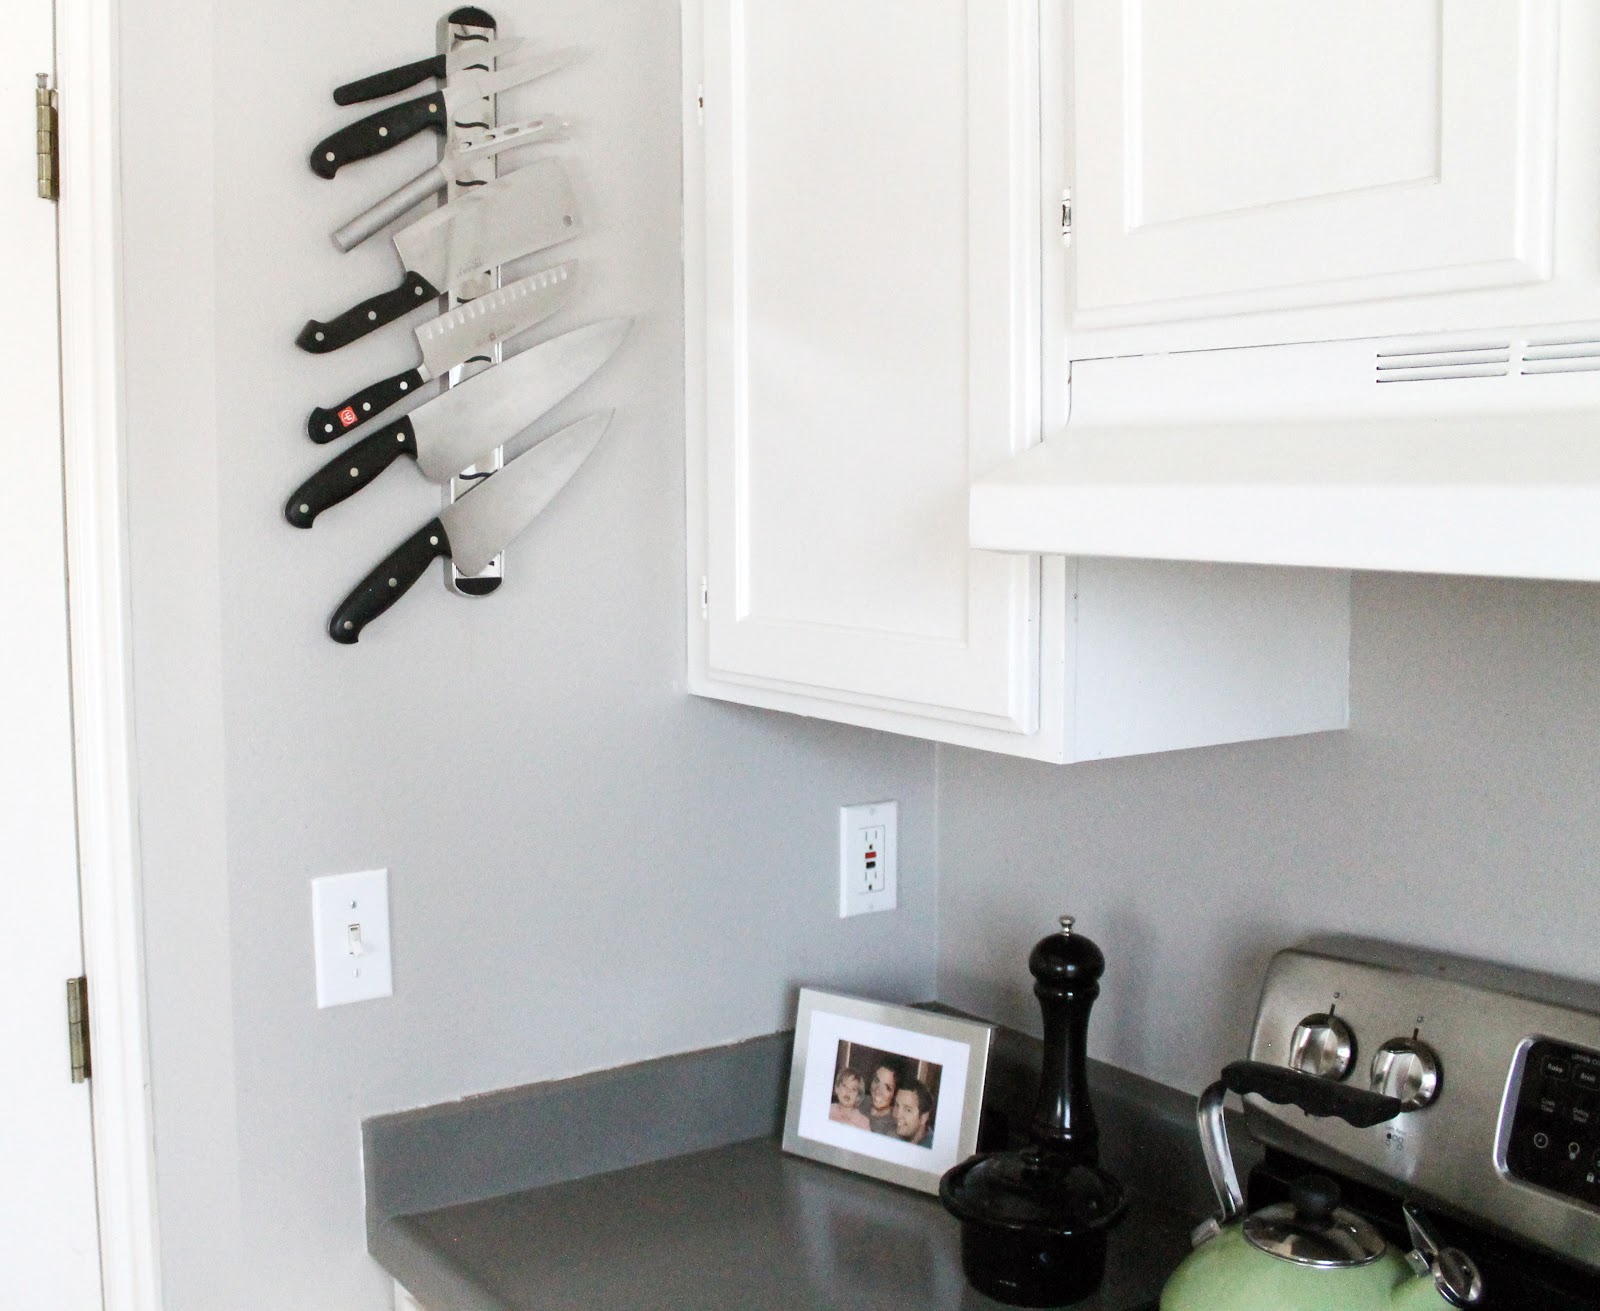 magnetic knife rack in the kitchen where to hang